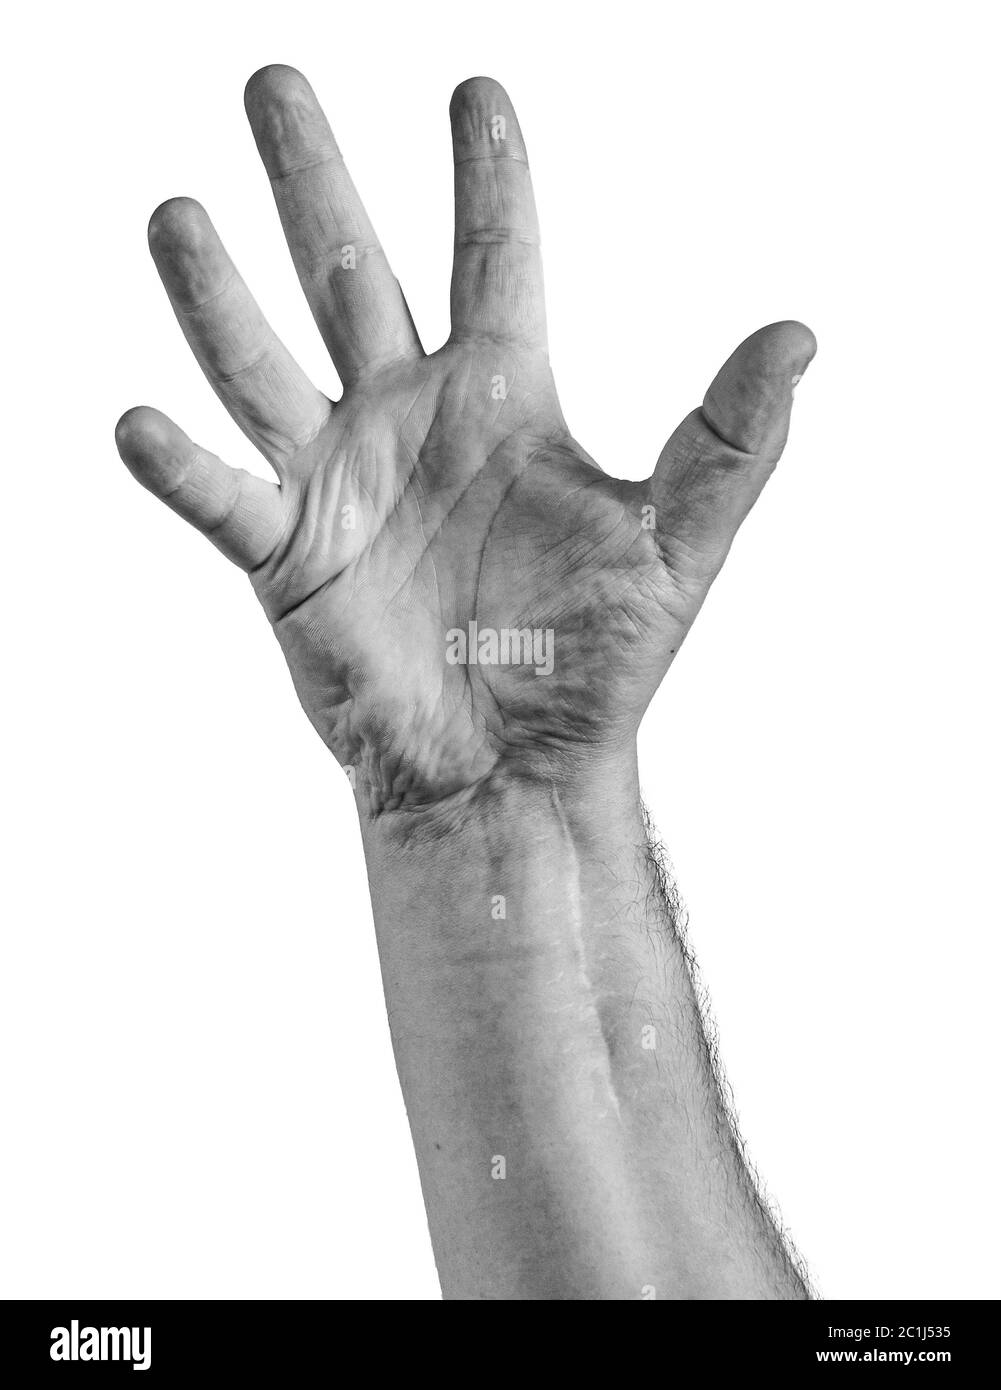 Woman hand showing the five fingers isolated on a white background Stock Photo